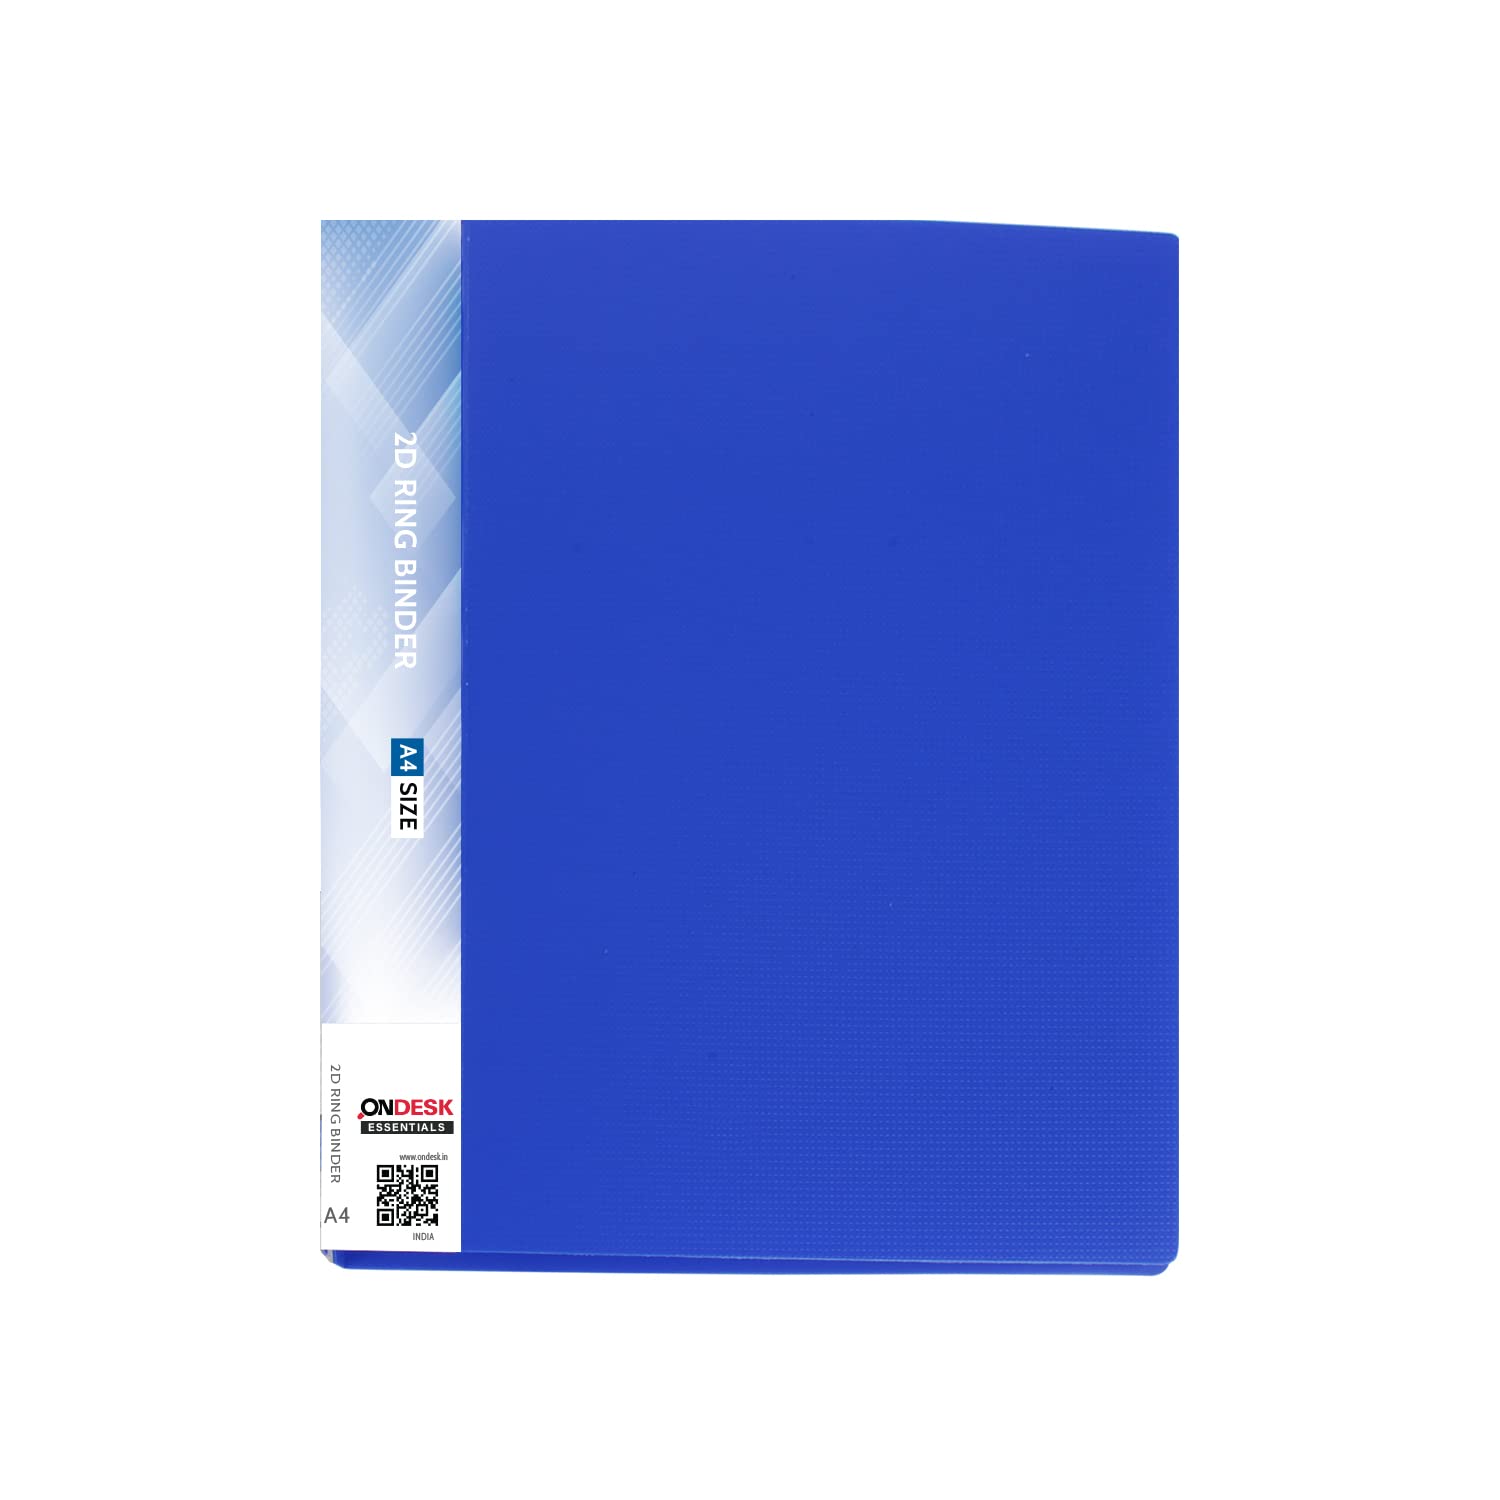 Buy A4 4 Ring Folders, A4 Ring Binder Folder, Plastic Folder Ring Binder,  with 25 mm D Metal Ring for A4 Size, Holds up to 230 Sheets, 38 mm Spine,  Blank Cover